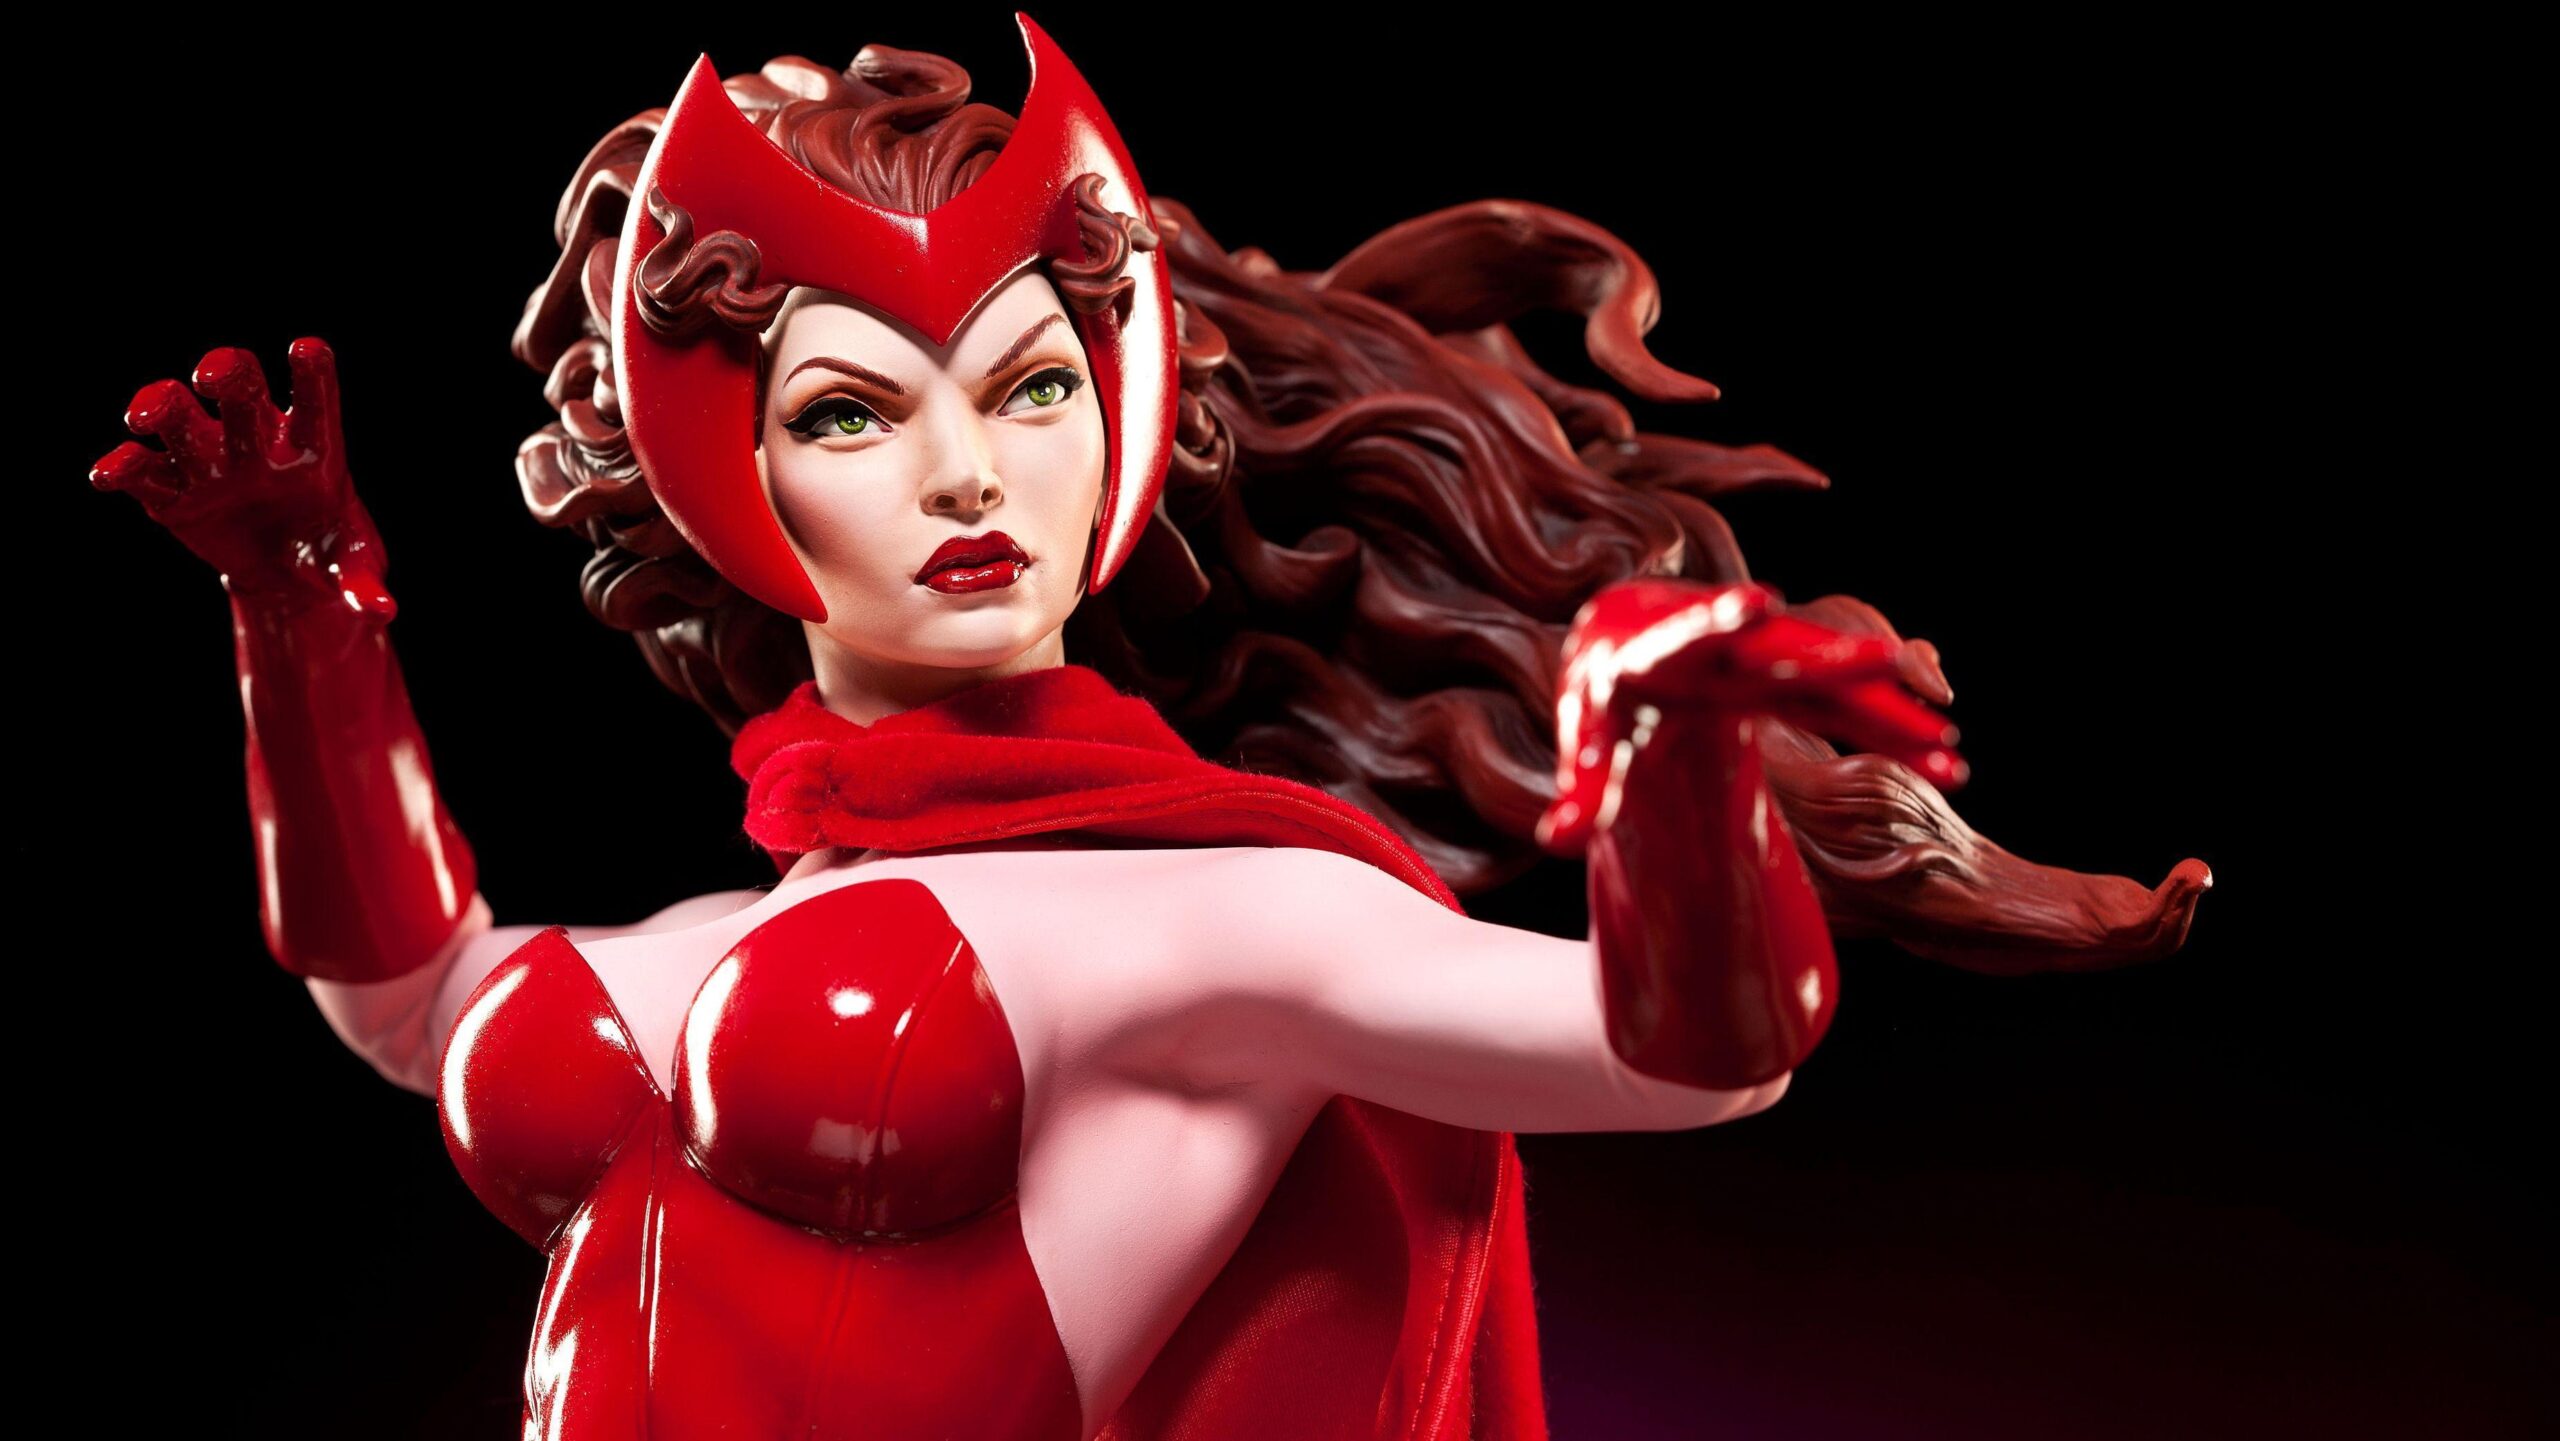 Scarlet Witch Computer Wallpapers, Desk 4K Backgrounds